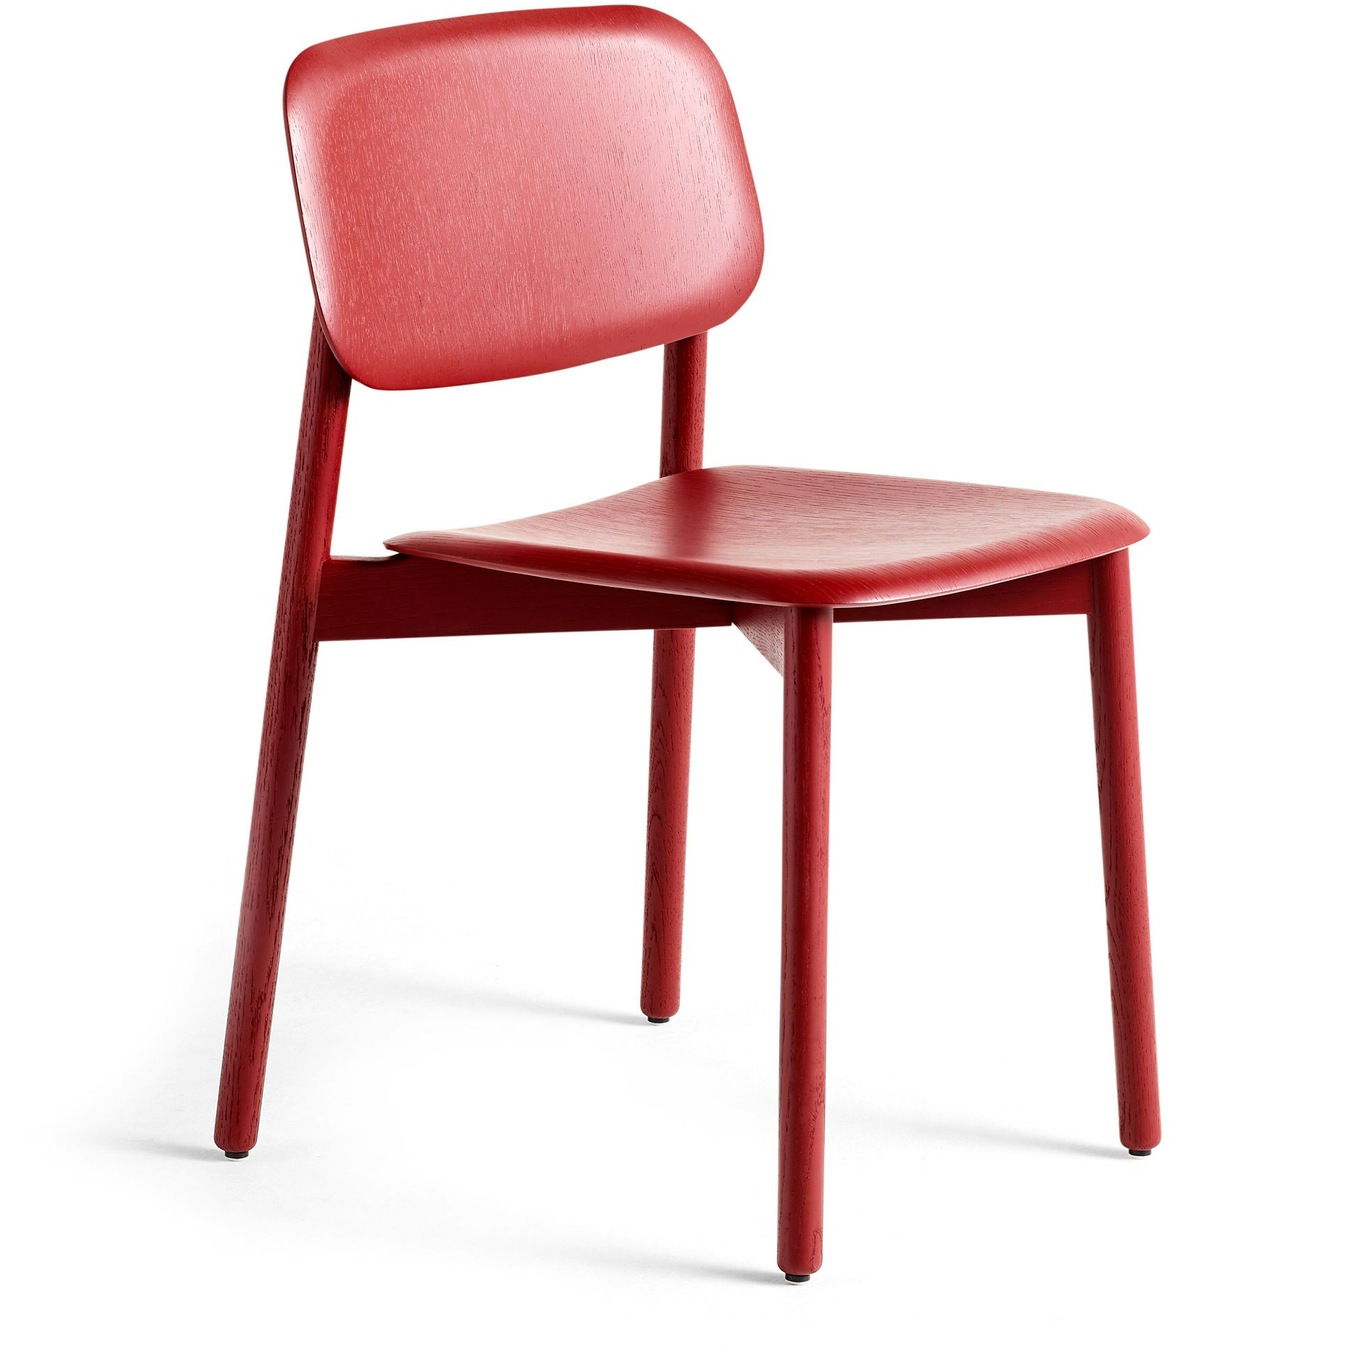 Soft Edge 60 Stol, Fall Red